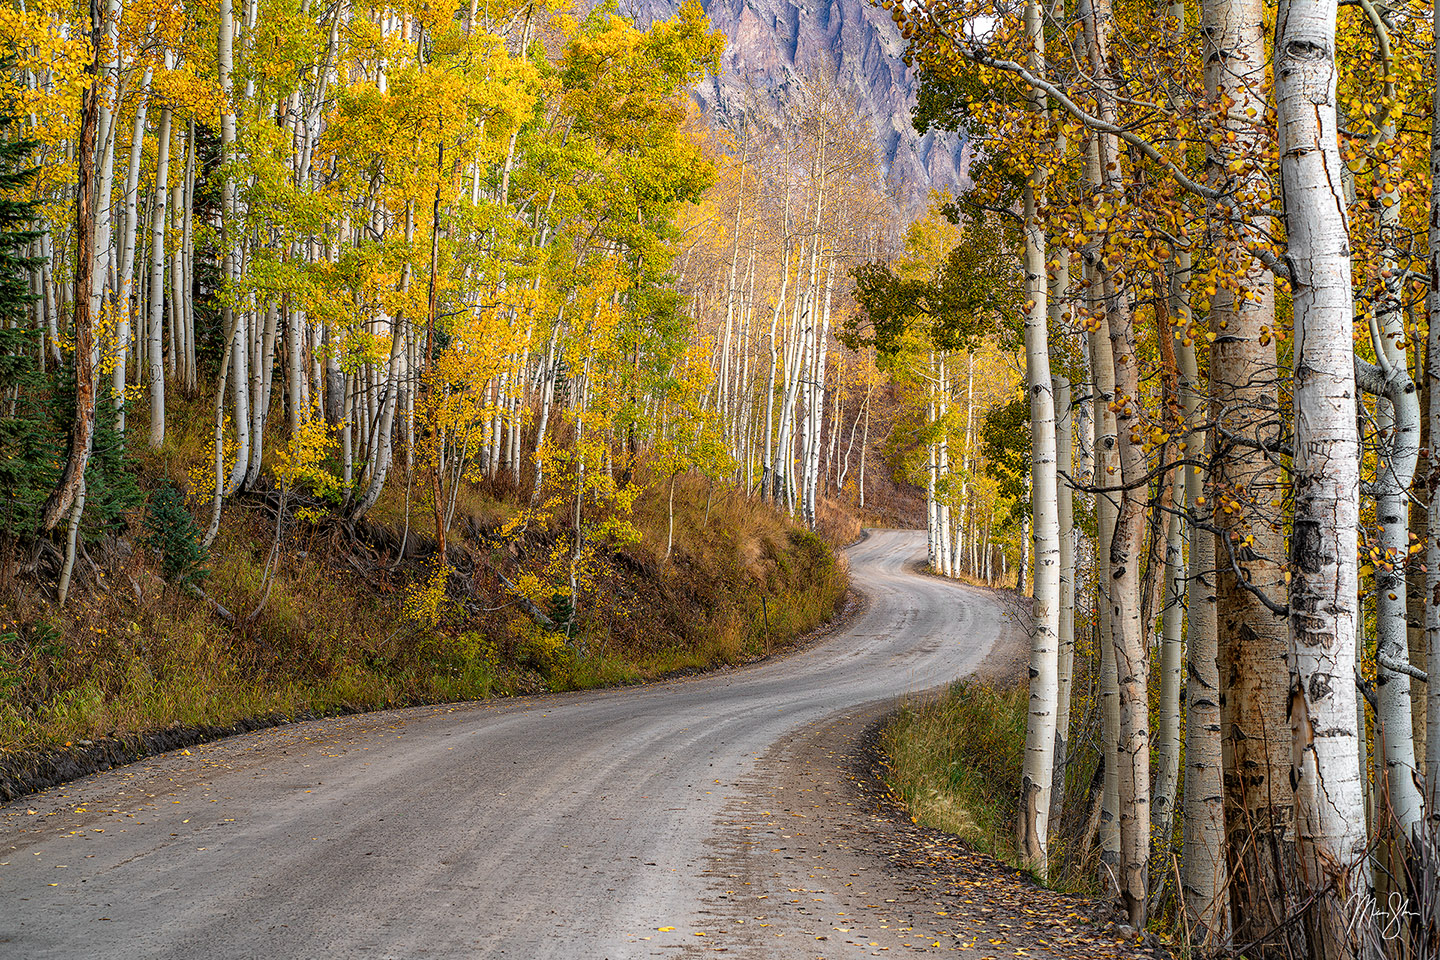 The Road to Gothic - Crested Butte, Colorado